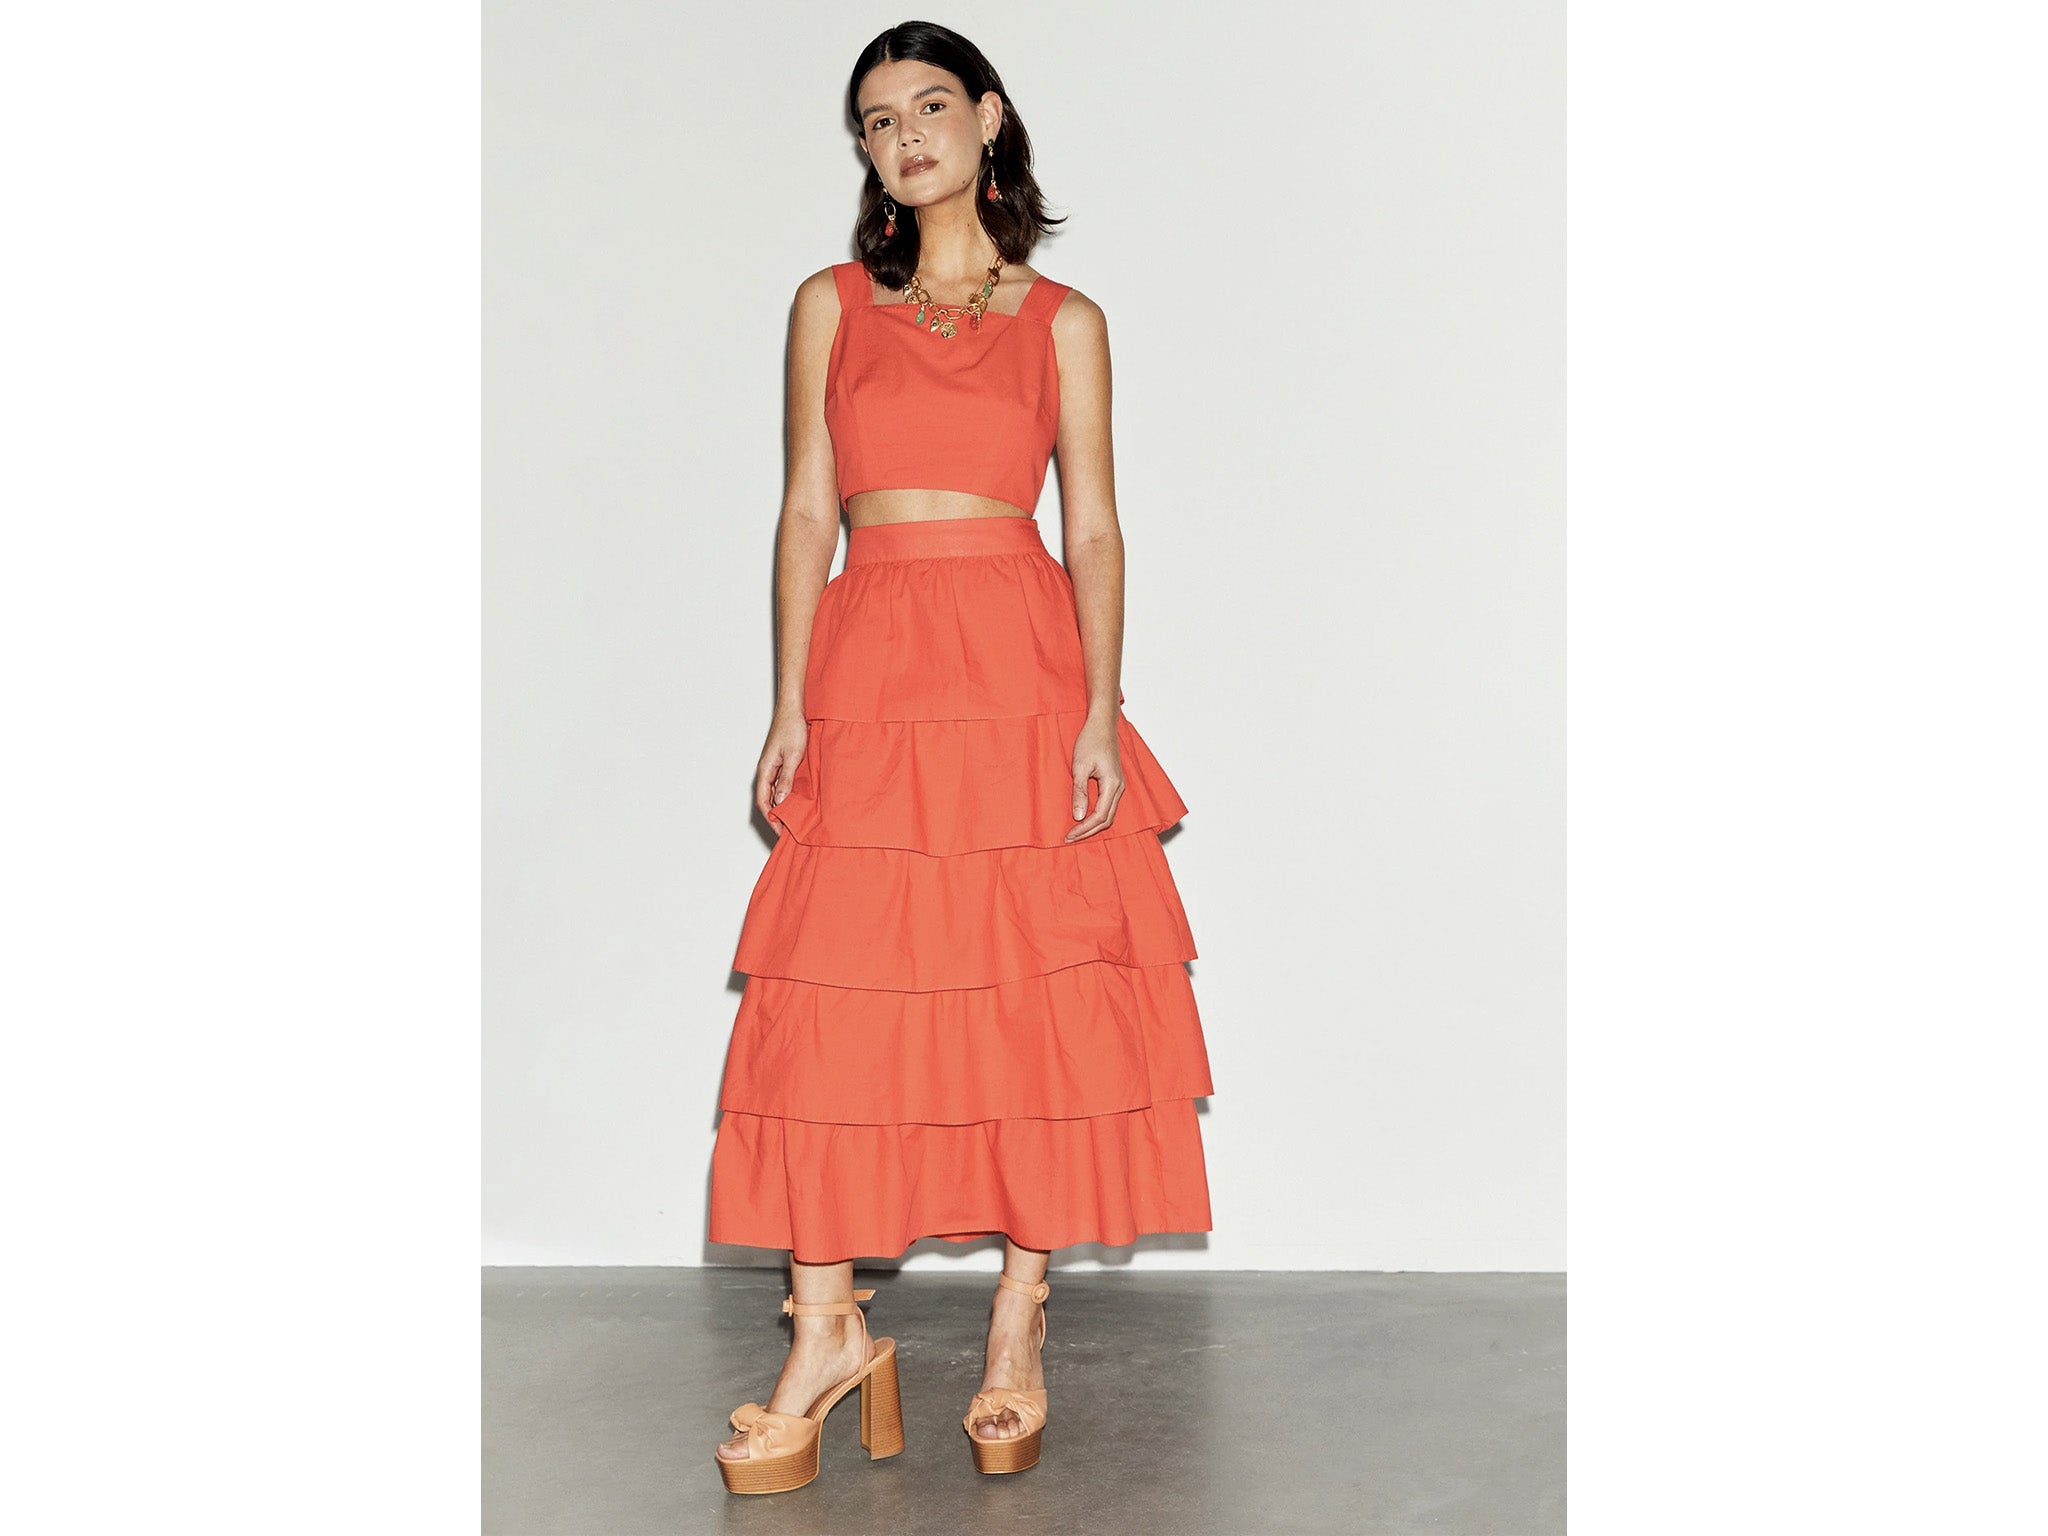 Best women's summer co-ords 2022: Mango, Free People, Asos and more